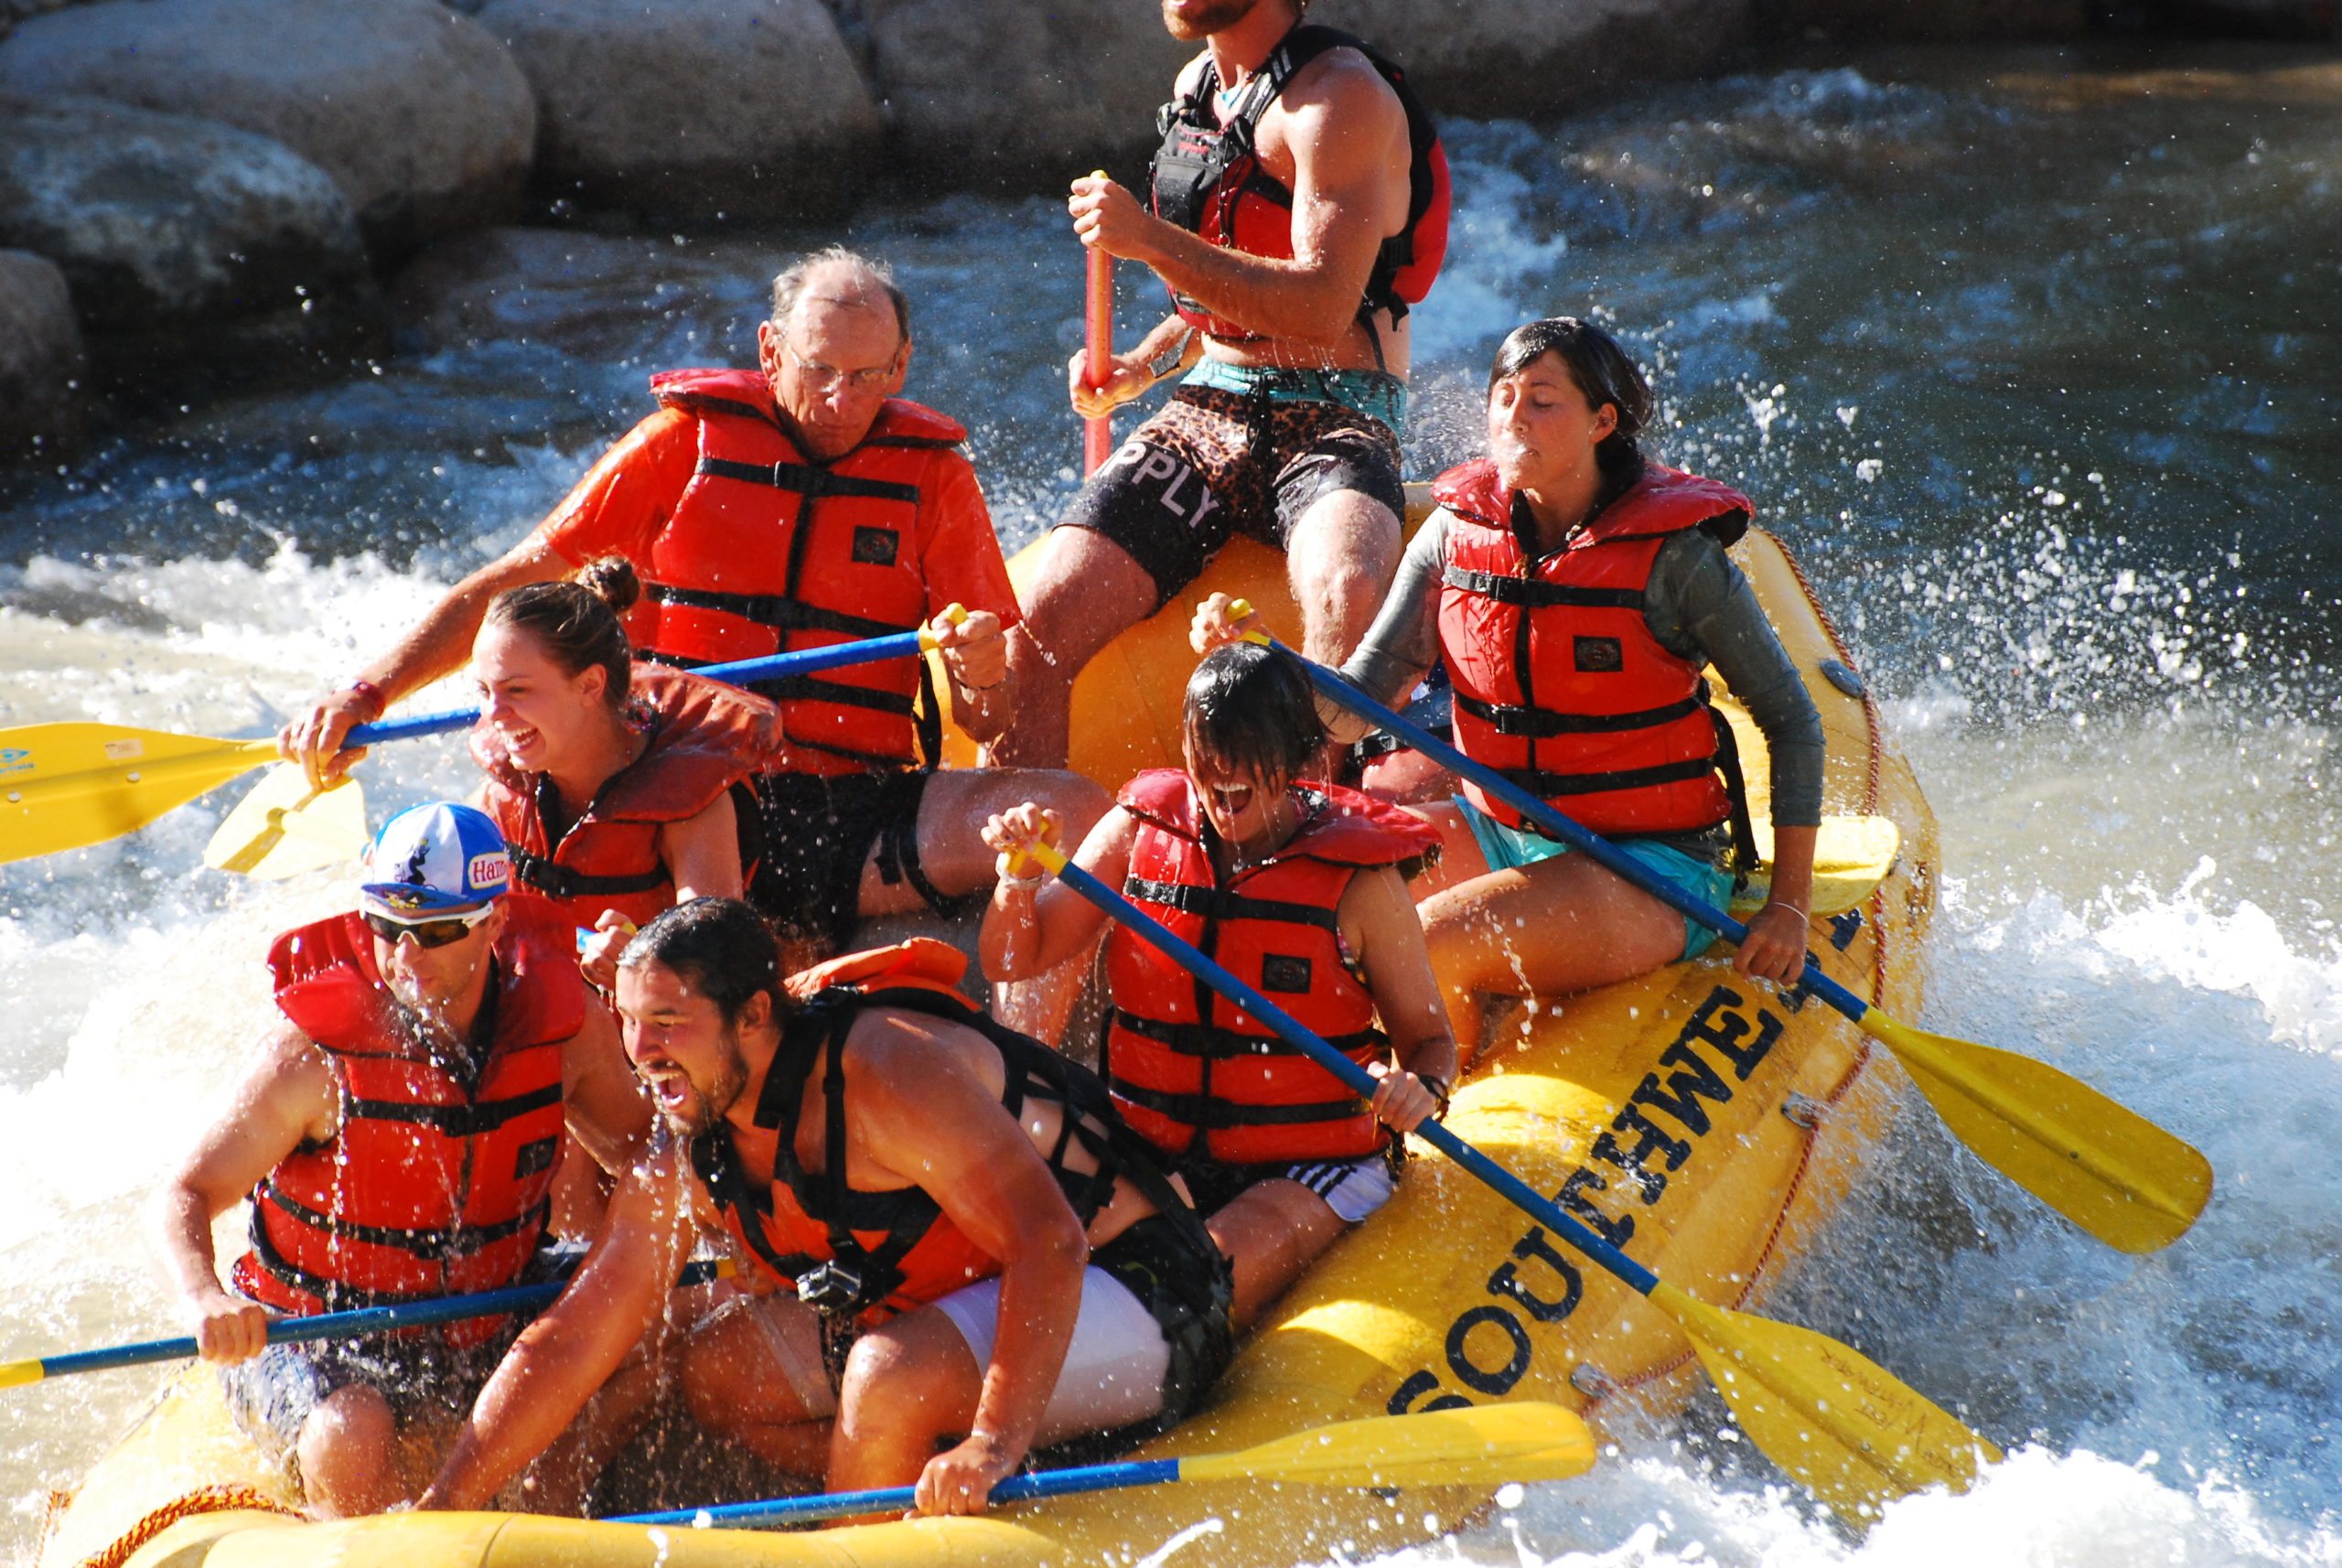 Rafting Pic scaled